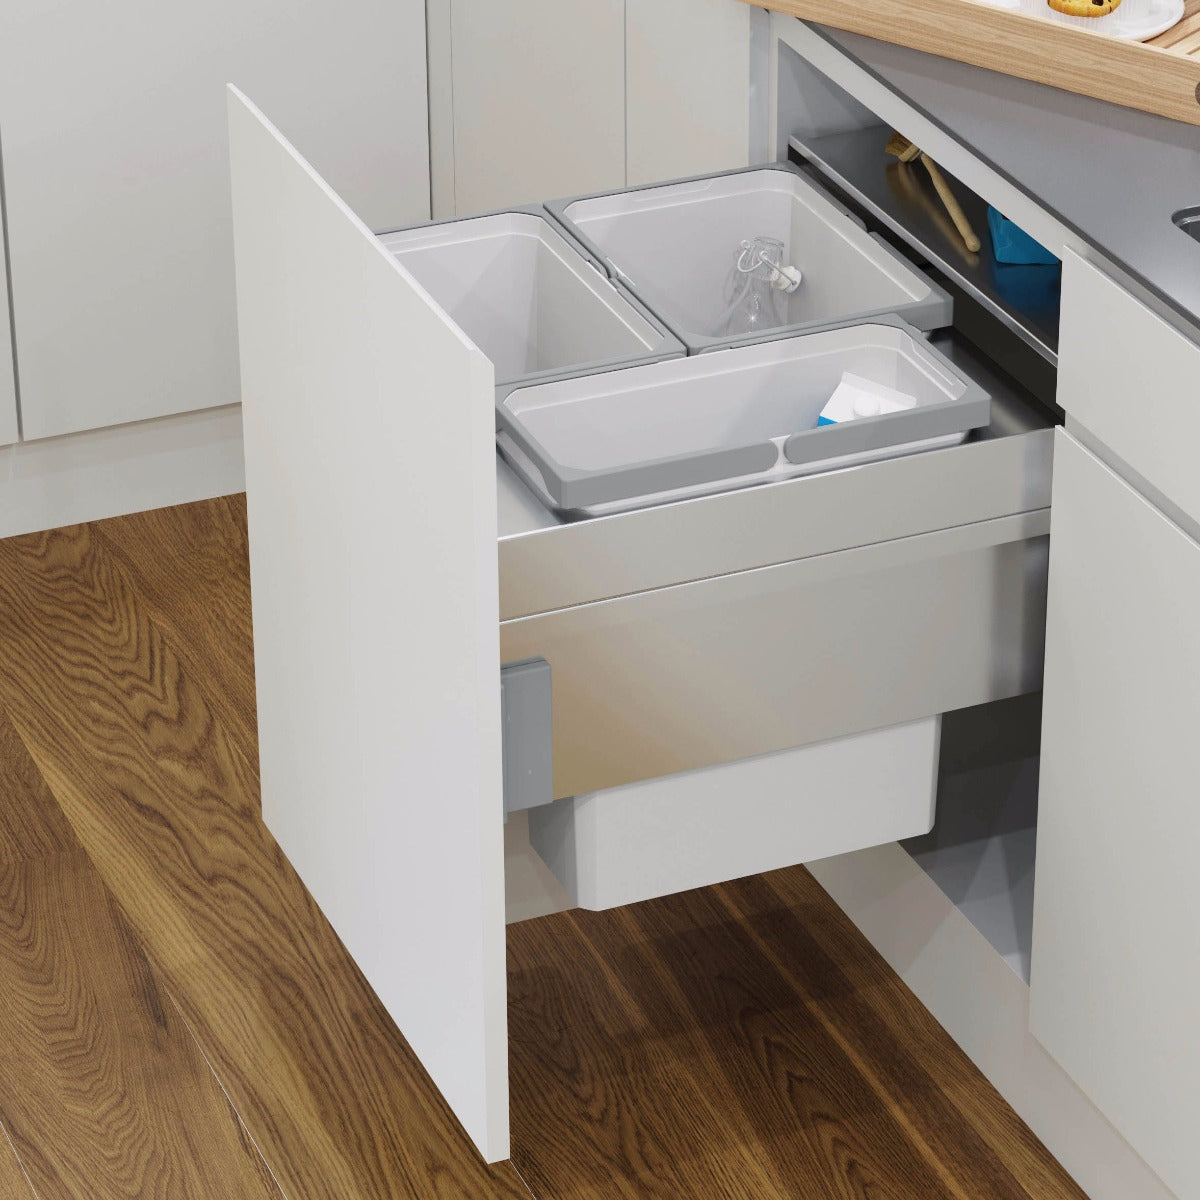 Vauth-Sagel pull-out integrated kitchen bin in silver grey with three compartments, ideal for separating waste and recycling